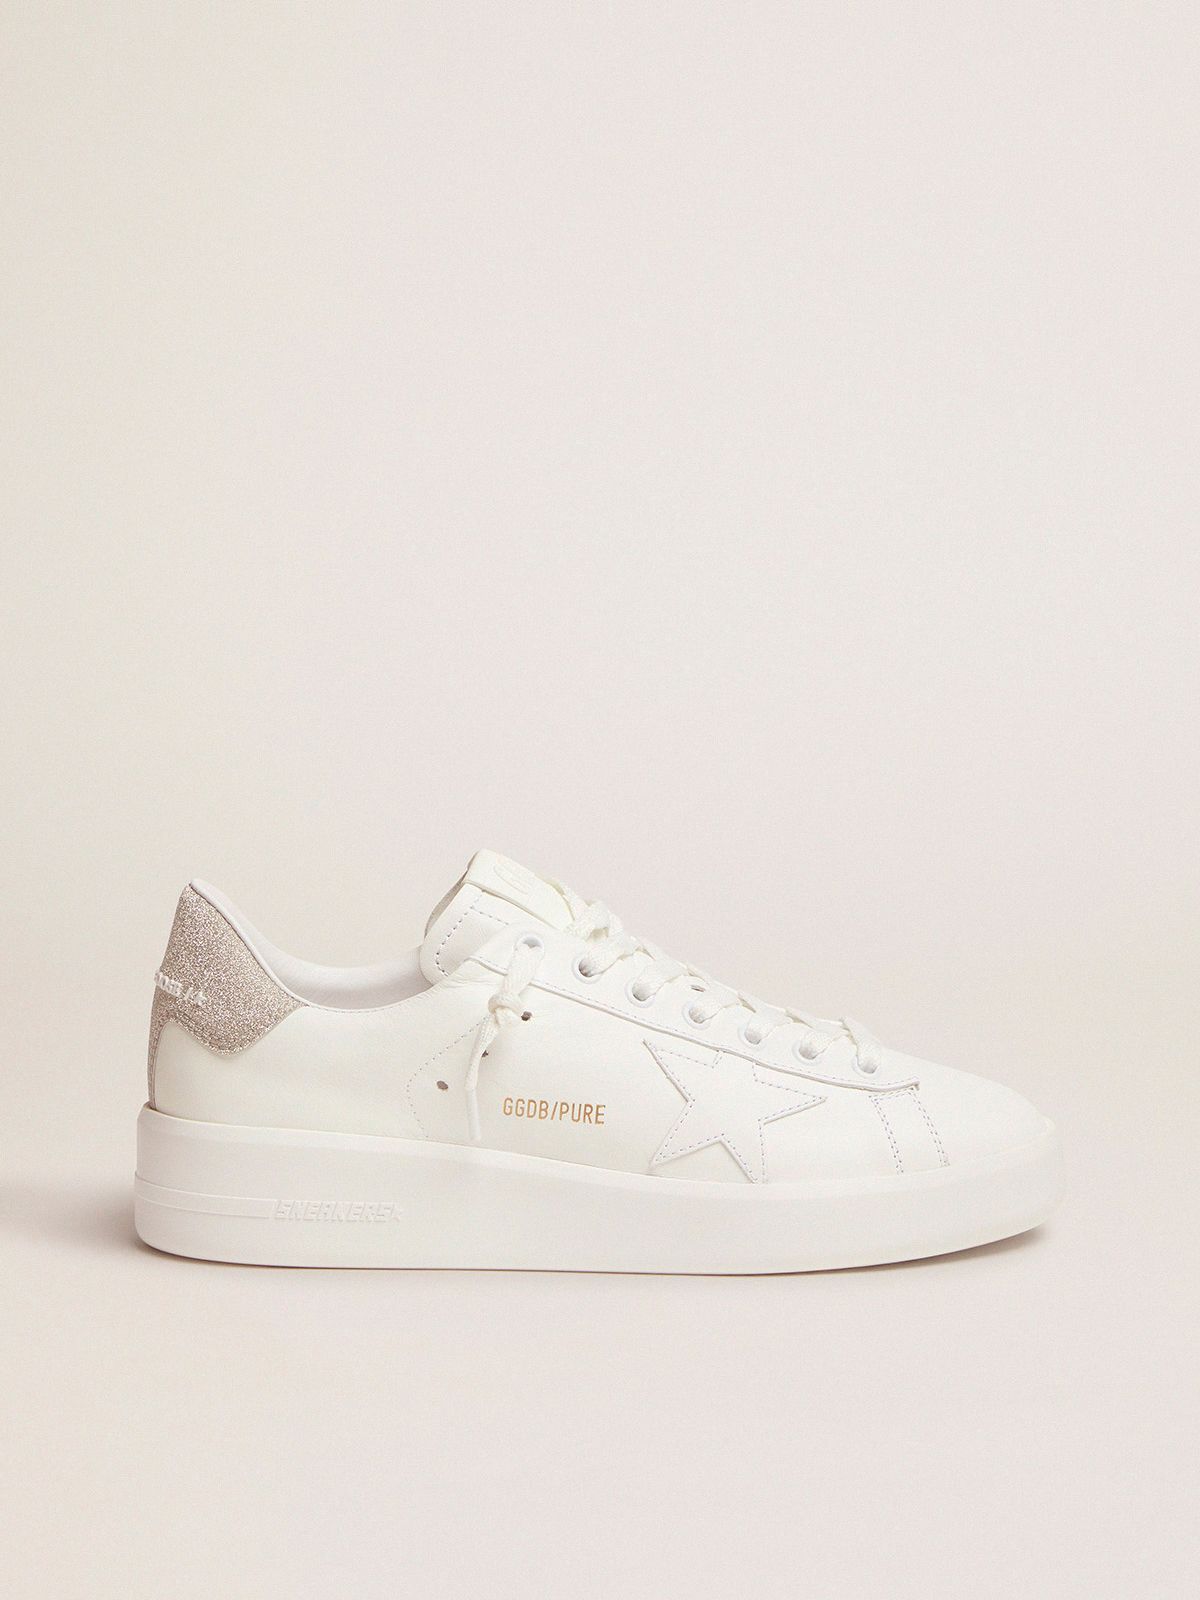 Purestar sneakers in white leather with champagne glitter heel tab | 